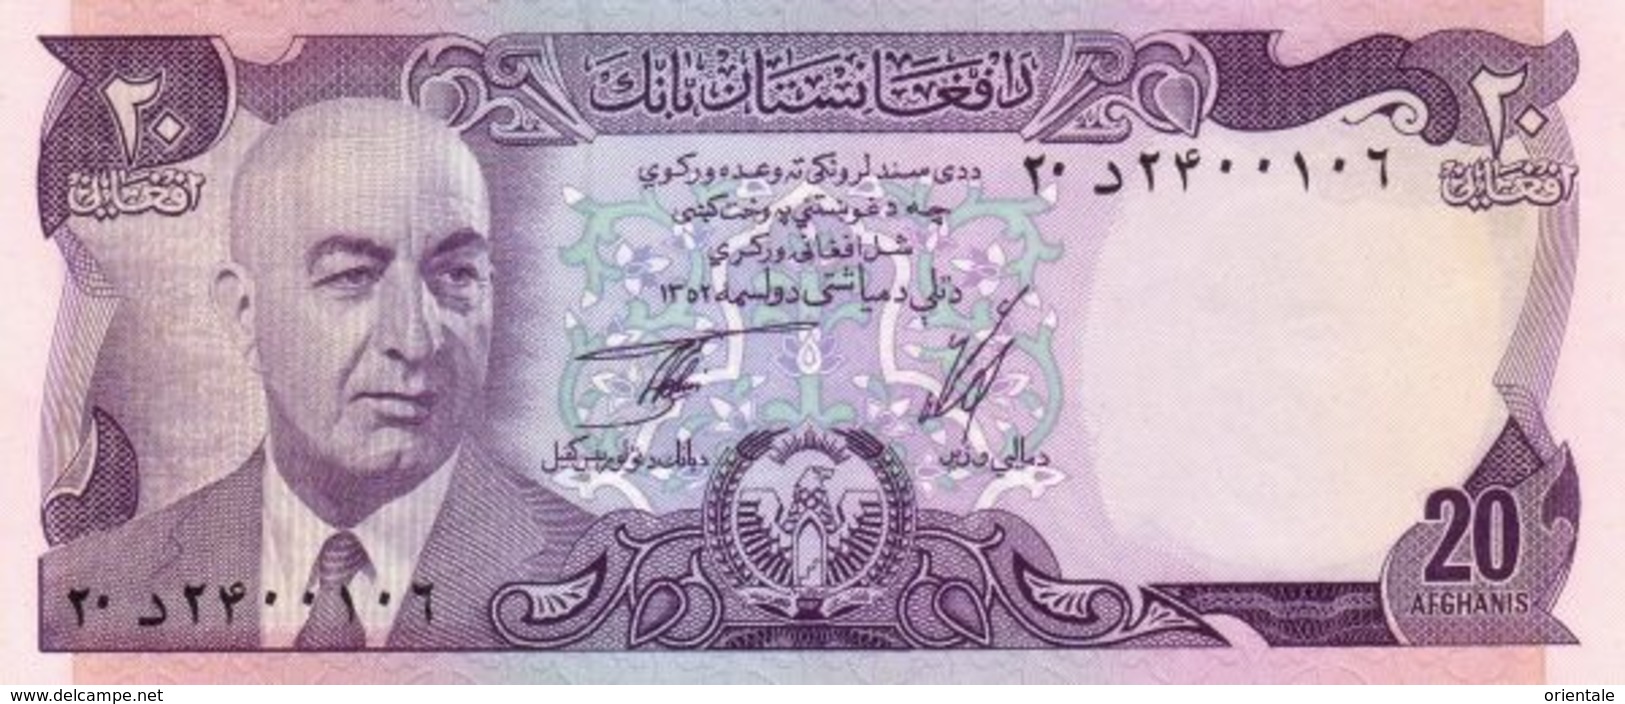 AFGHANISTAN P. 48a 20 A 1973 UNC - Afghanistan